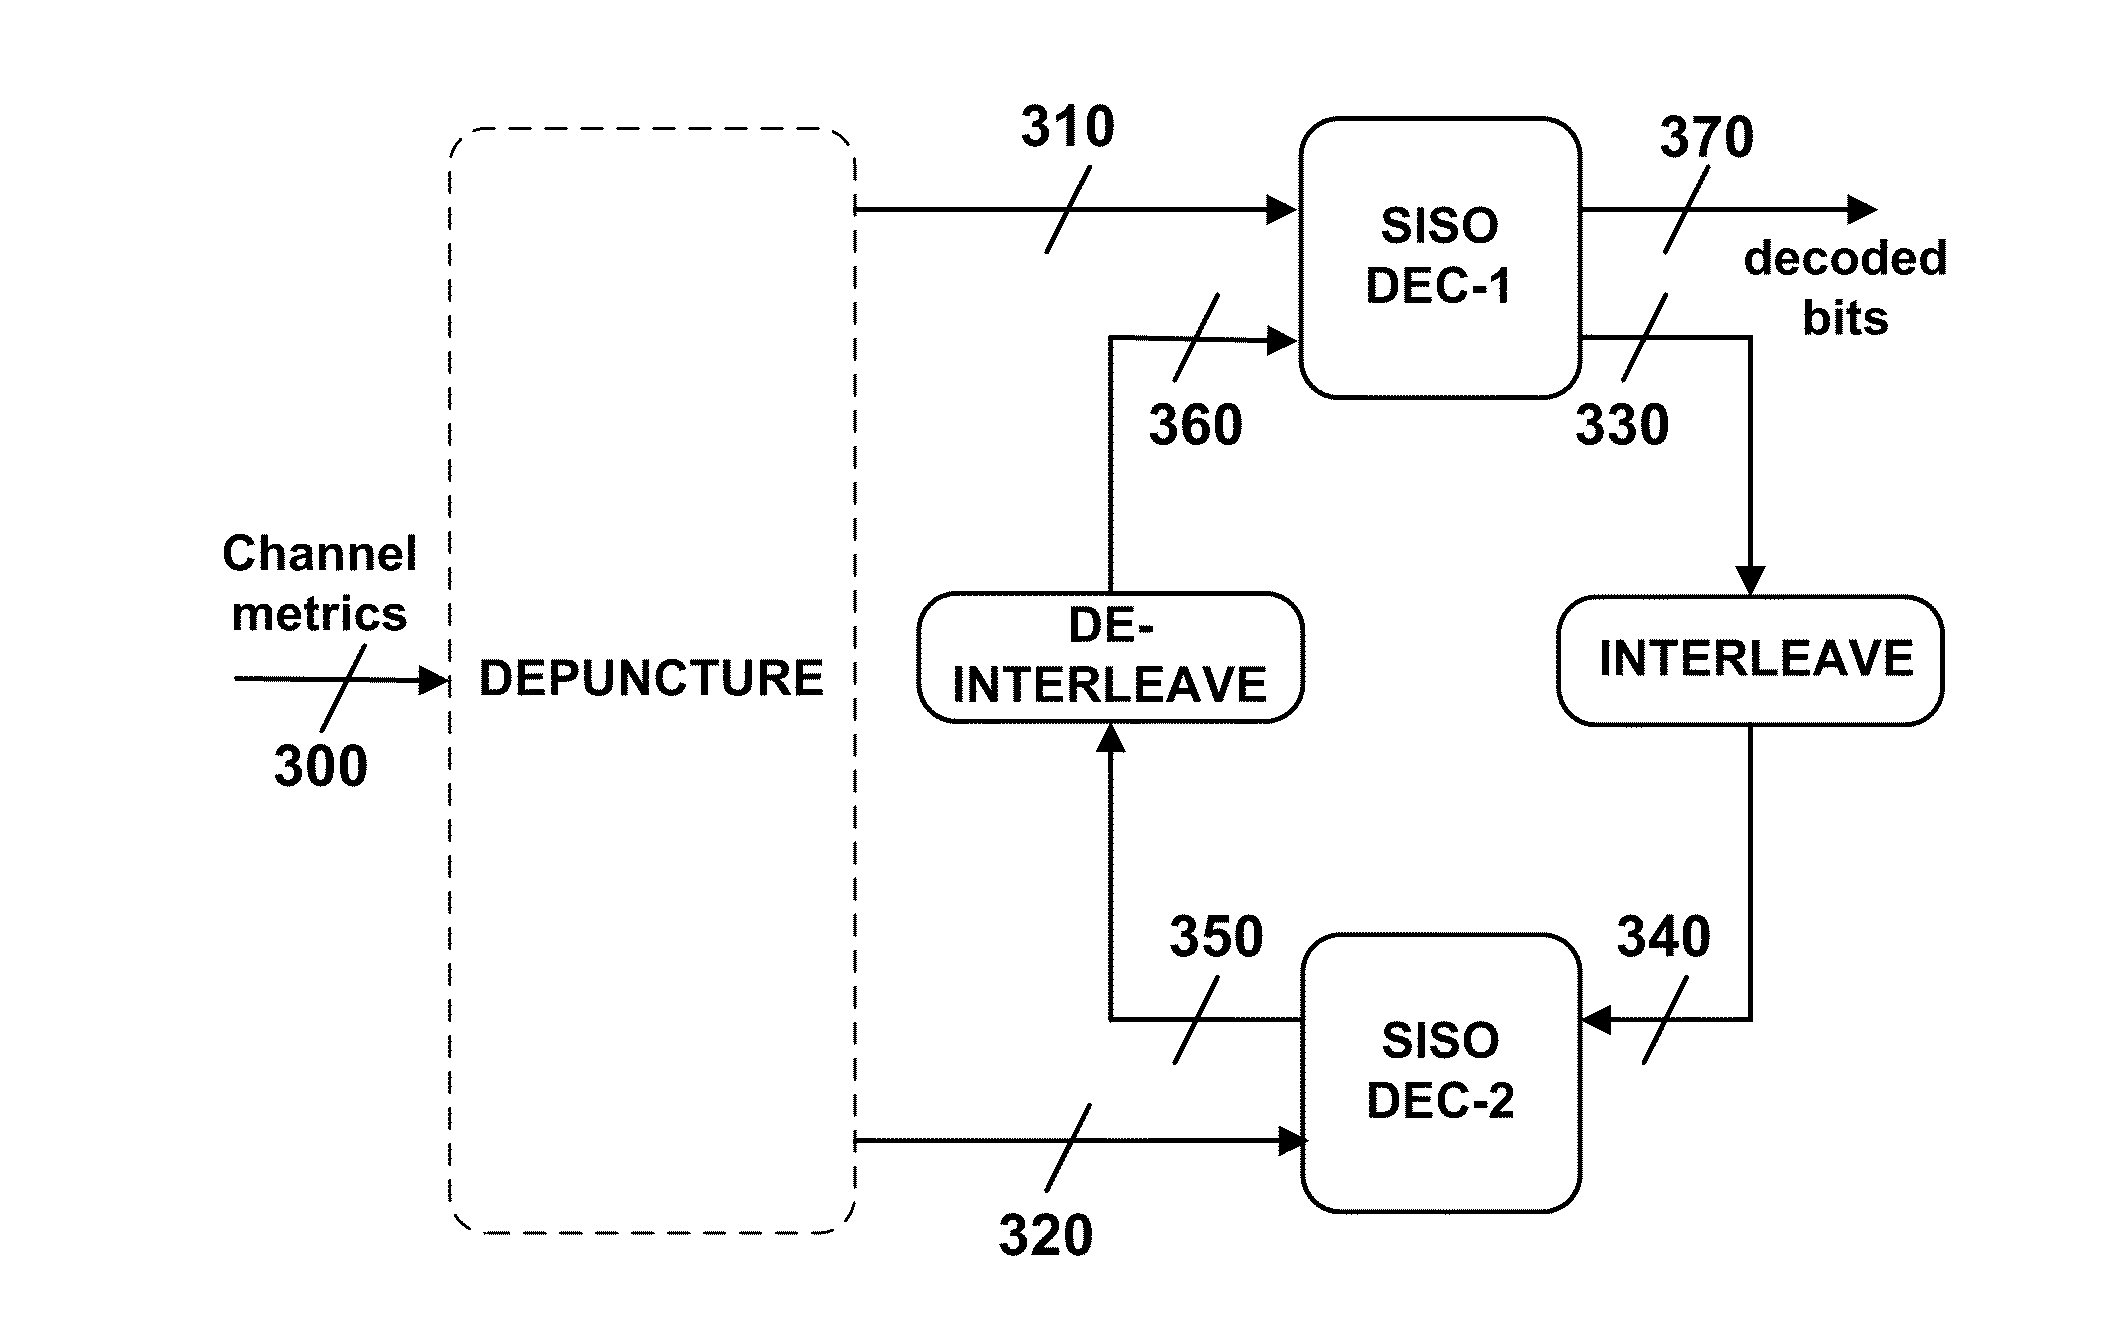 Tunable early-stopping for decoders